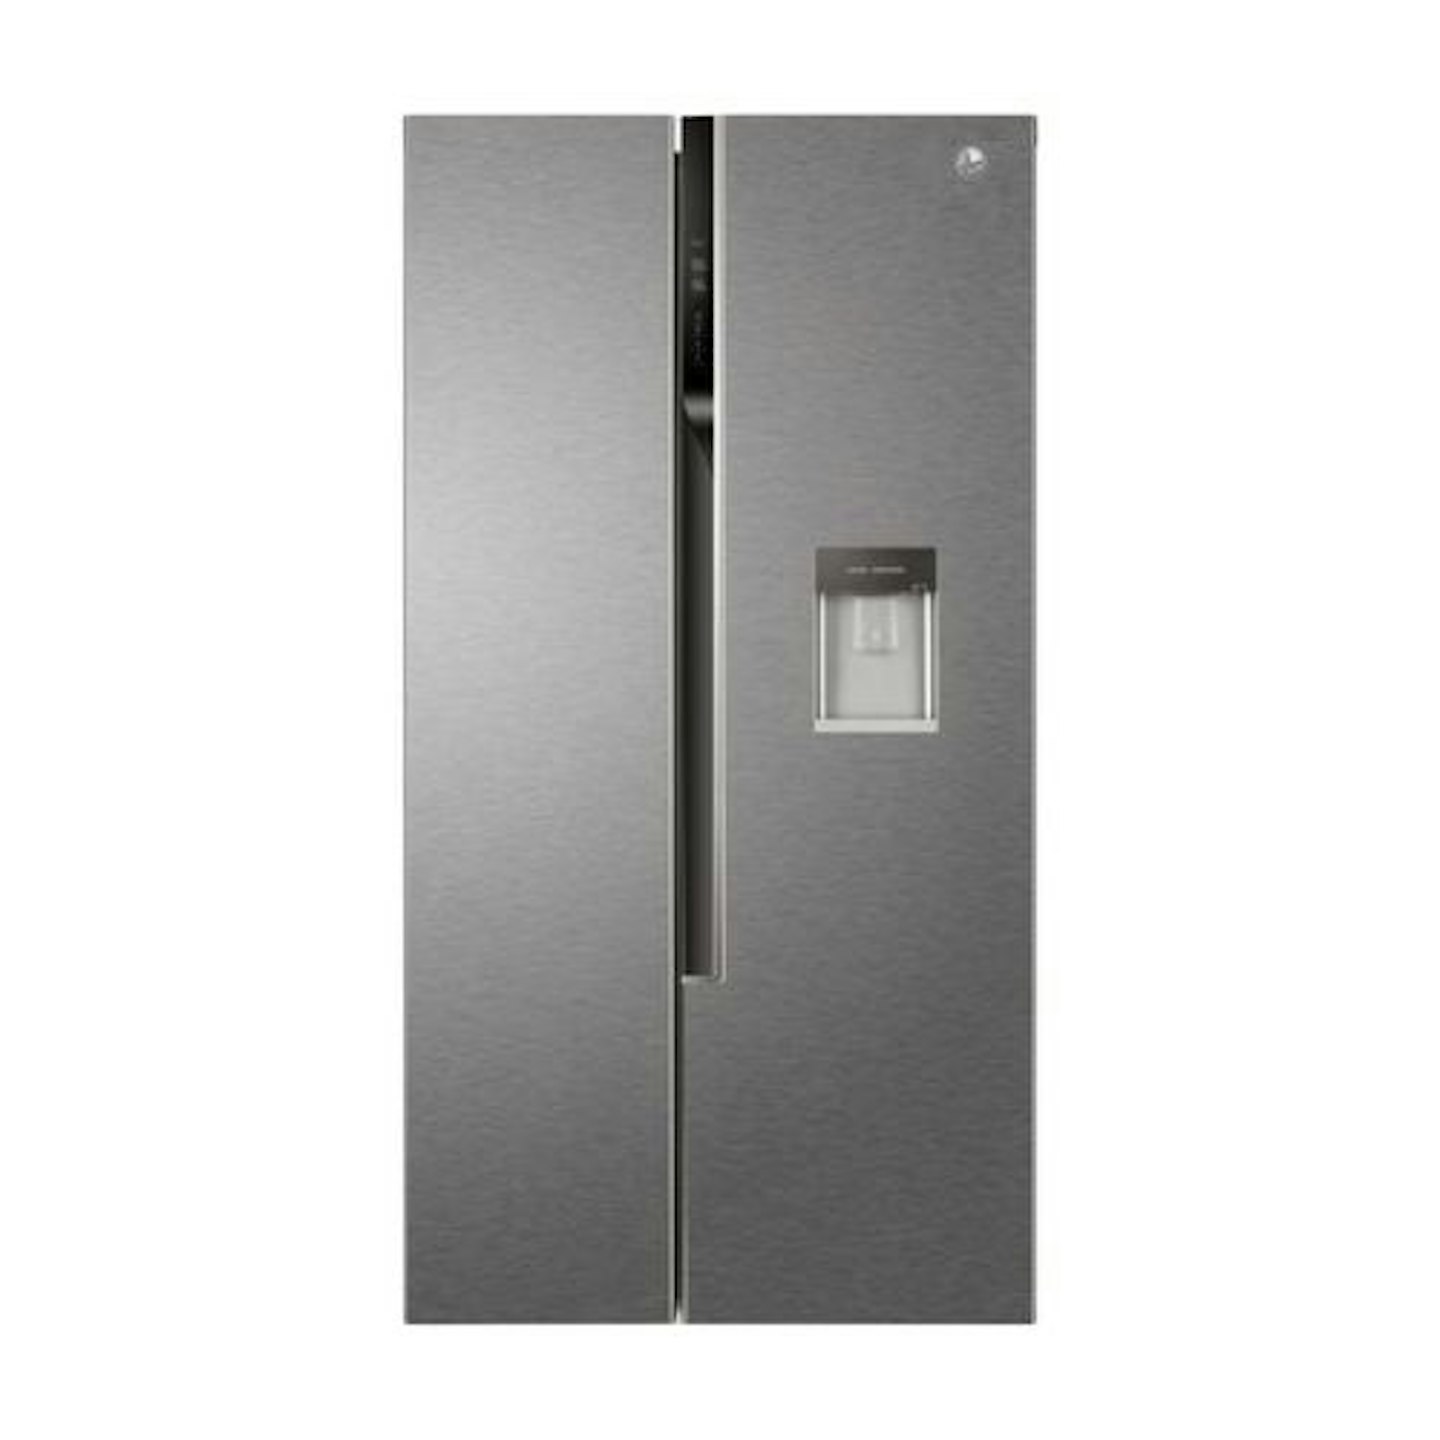 HOOVER HHSWD918F1XK American-Style Fridge Freezer - Stainless Steel